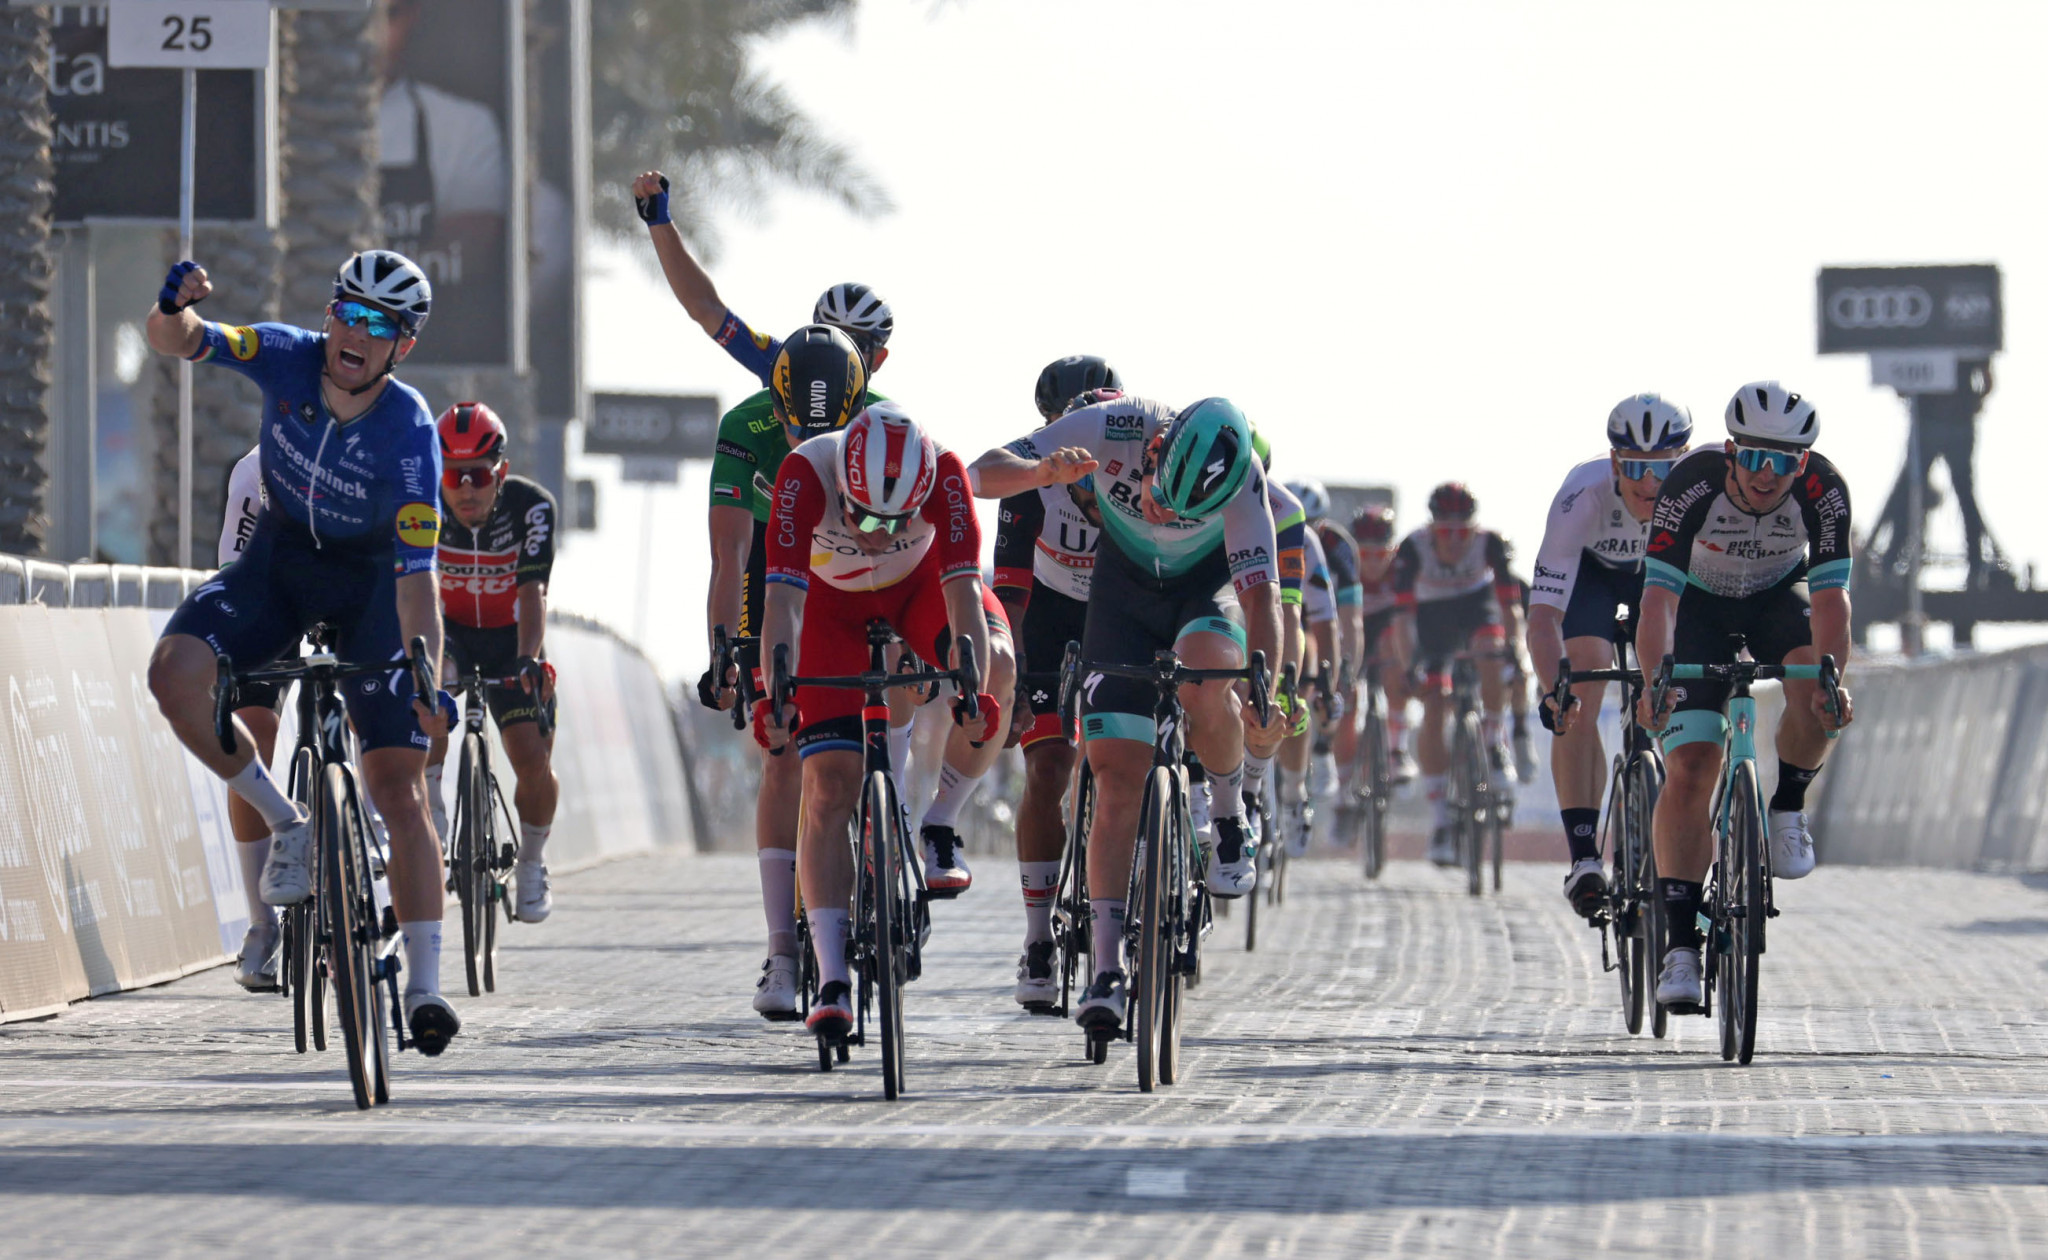 Bennett earns second stage win at UAE Tour in sprint finish